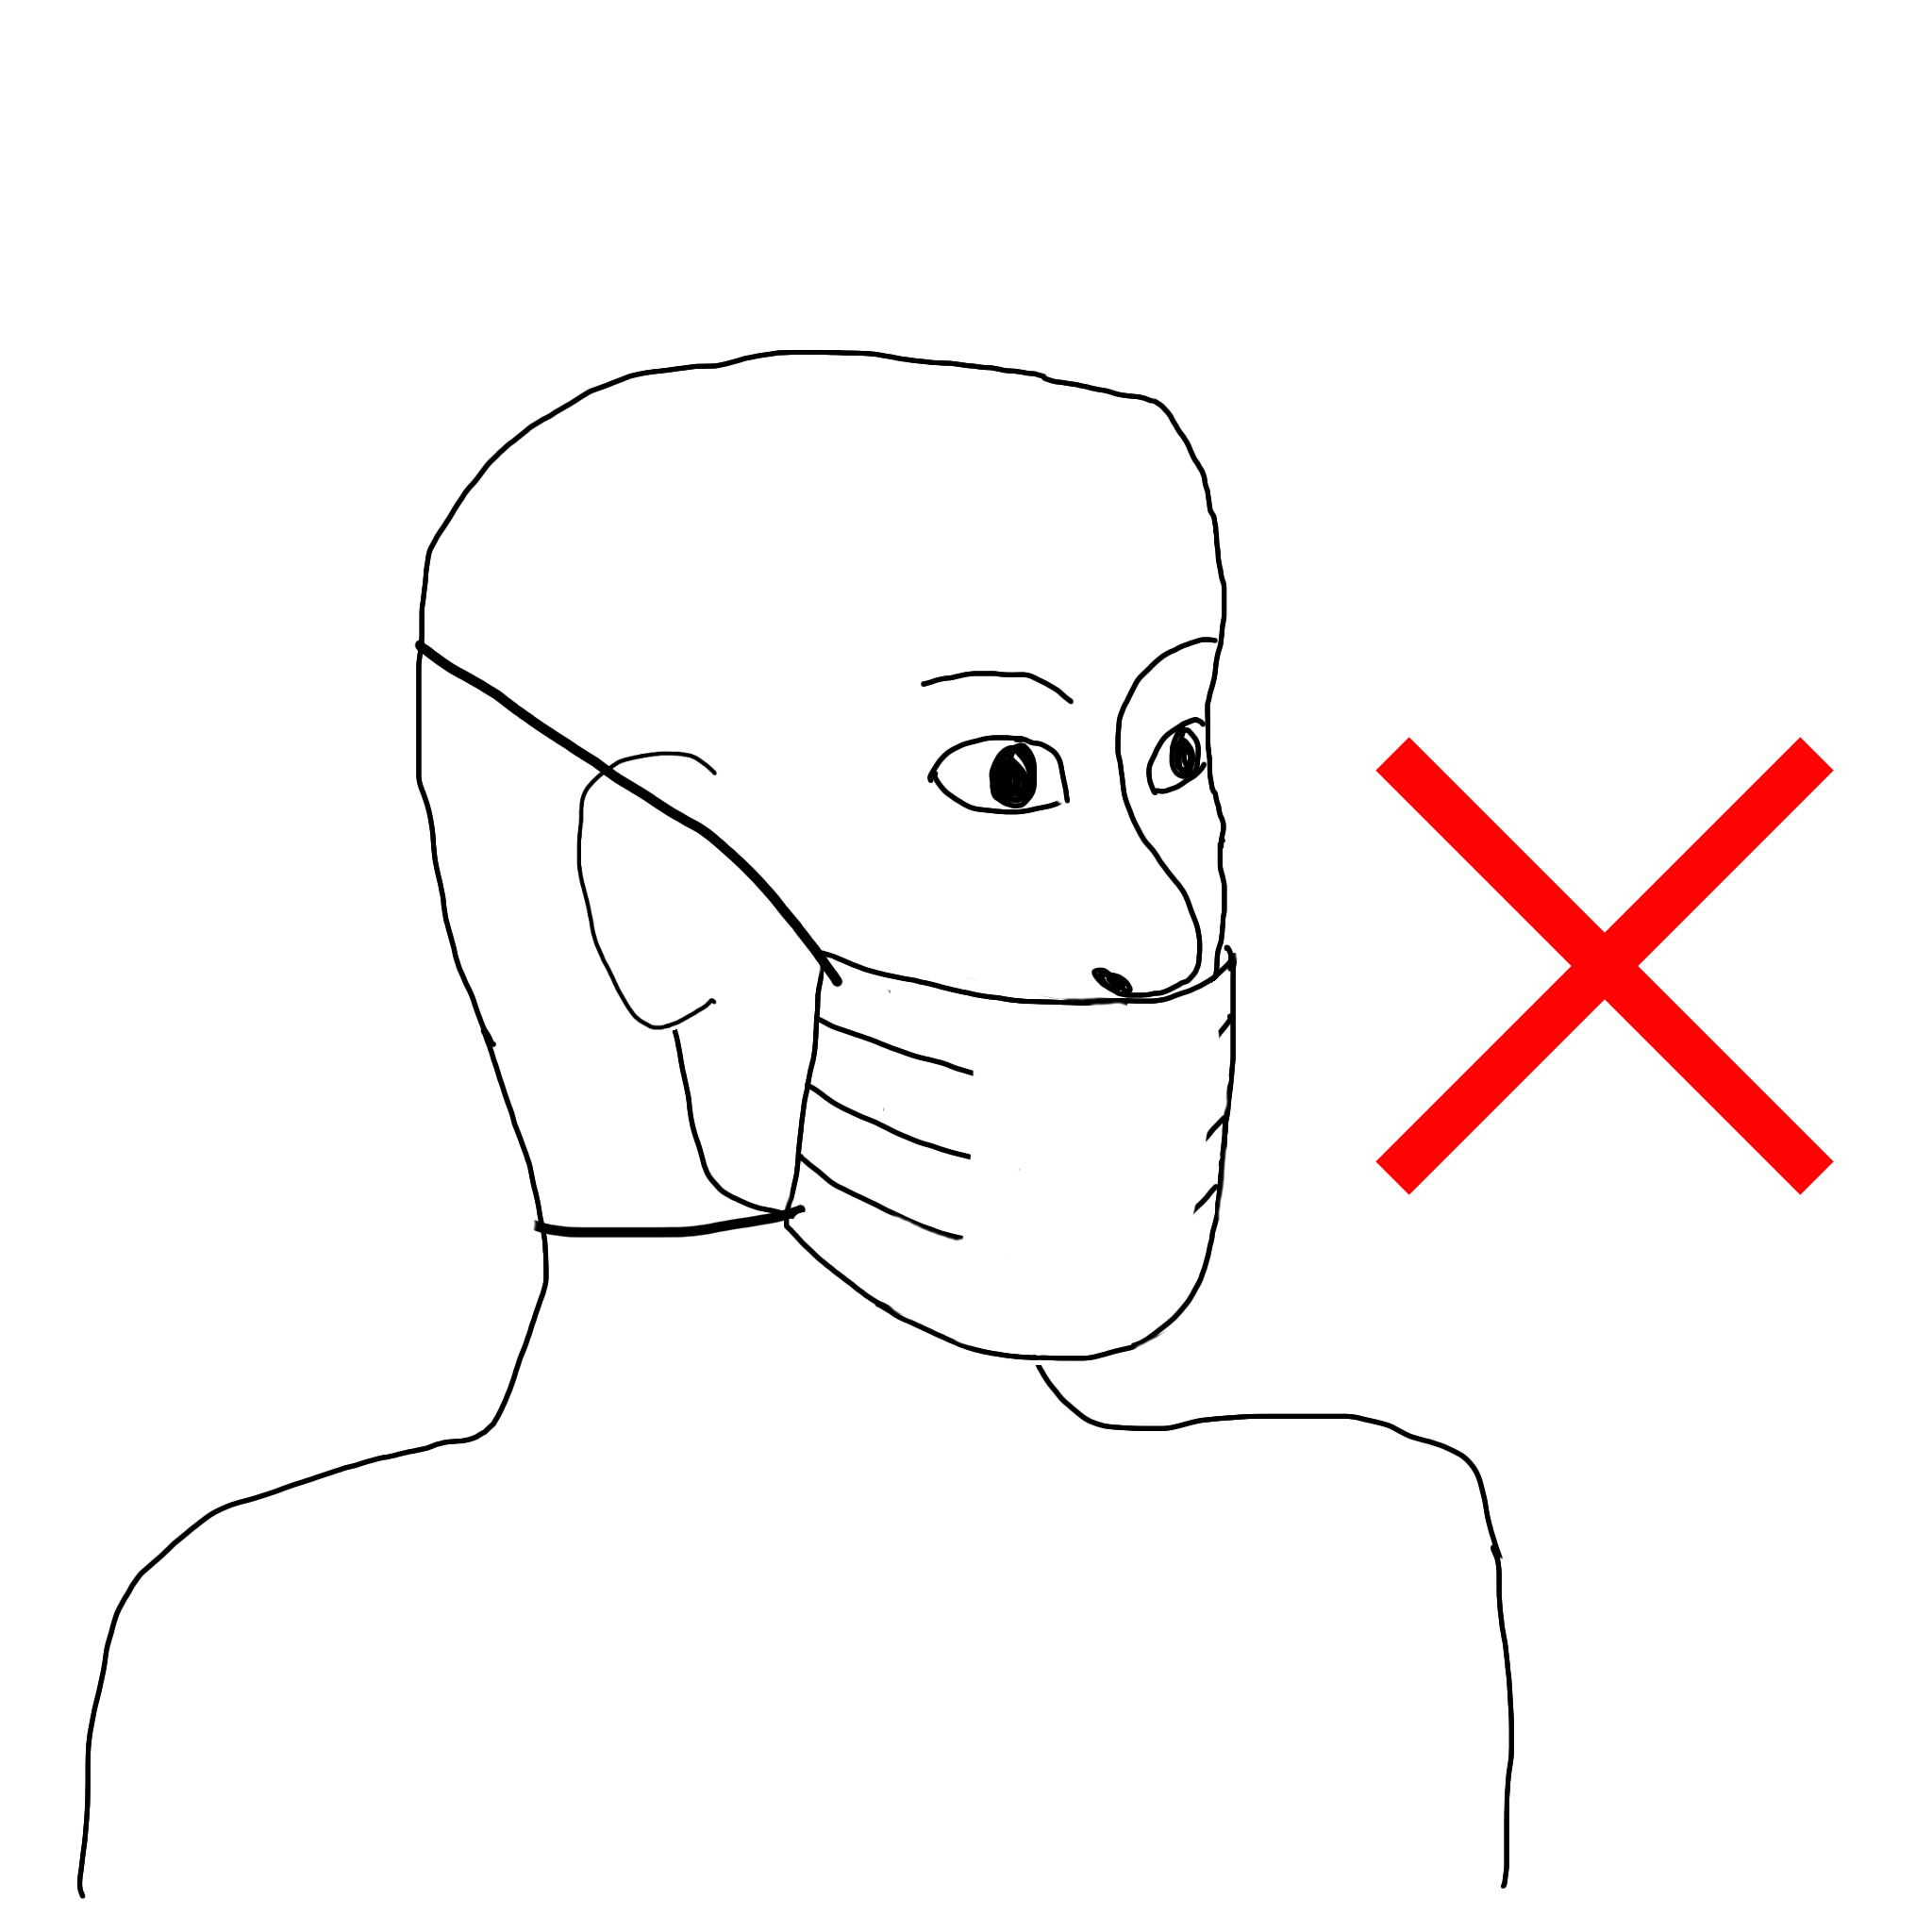 A mask being worn over the mouth and chin only, with the nose exposed.